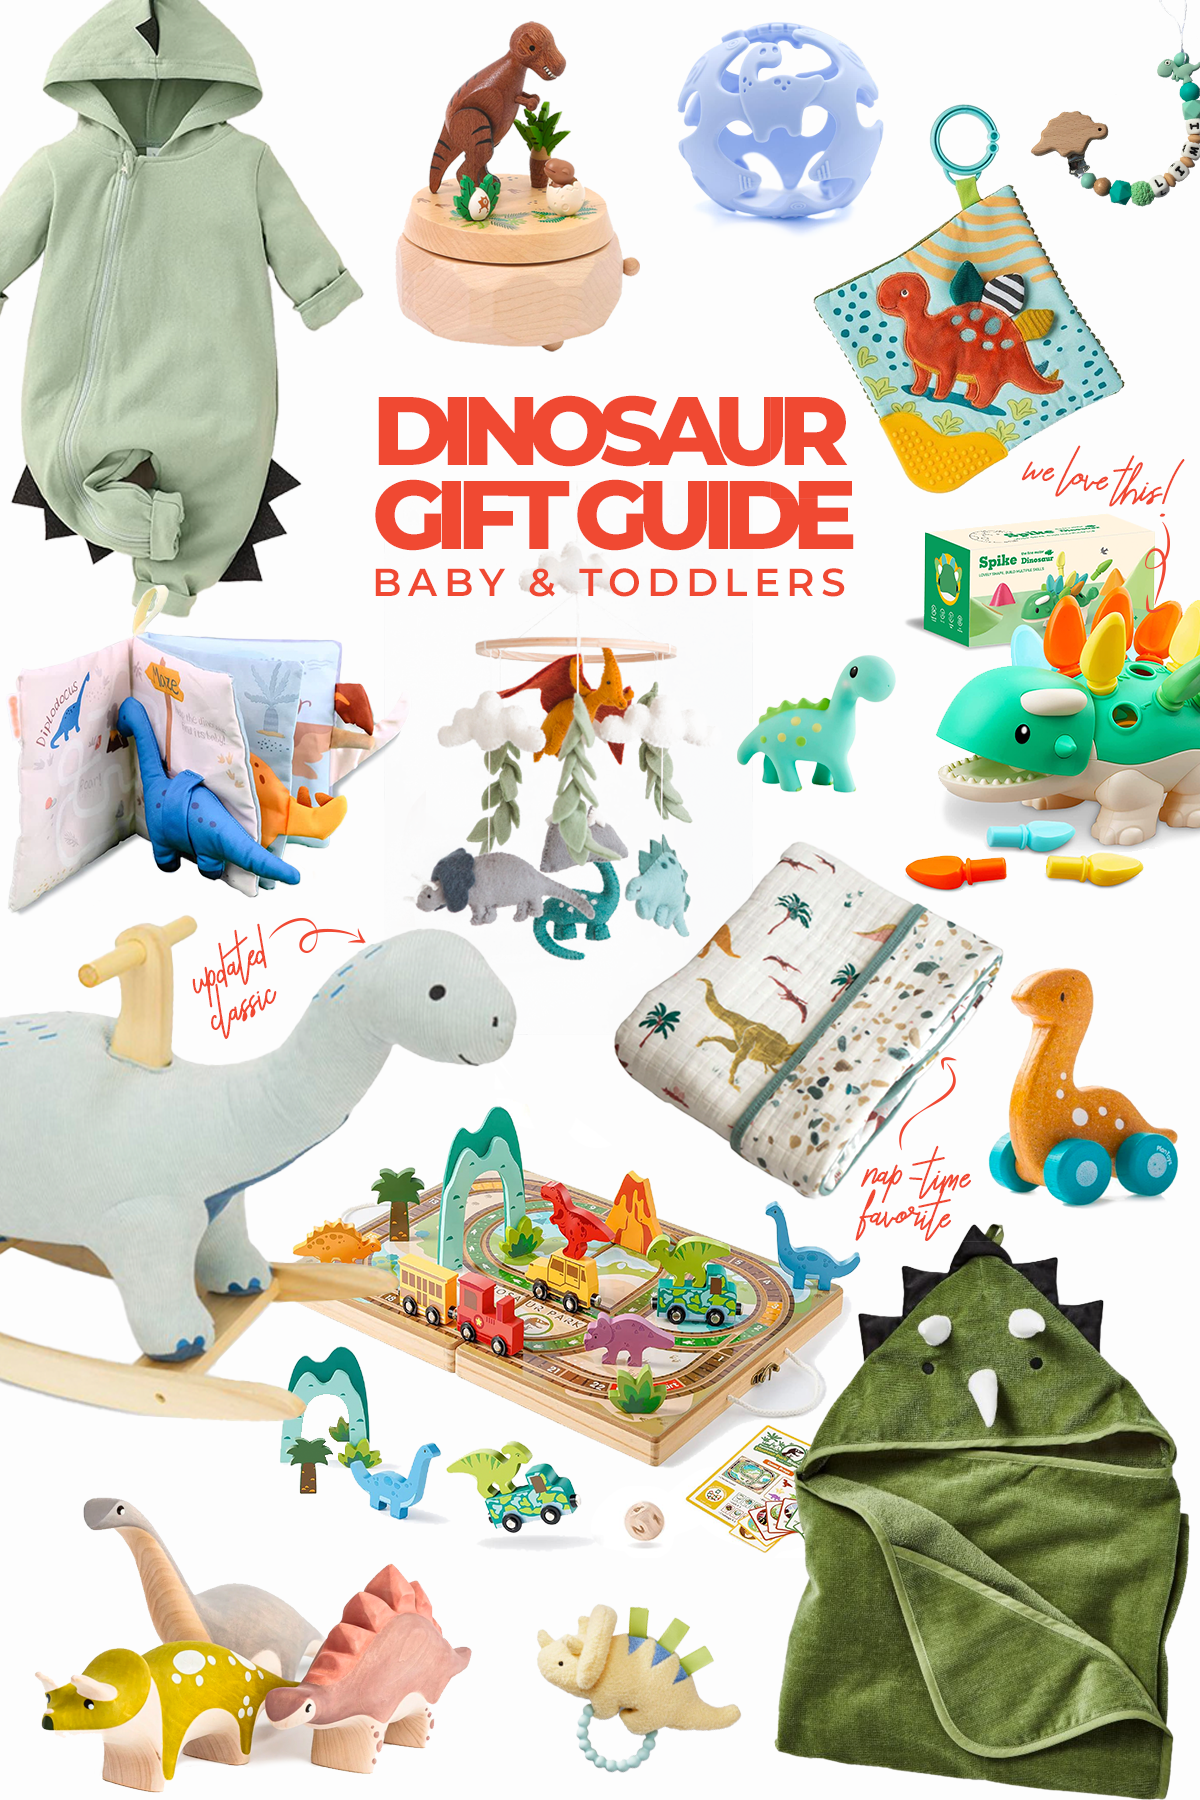 Dinosaur Gift Guide Baby & Toddlers